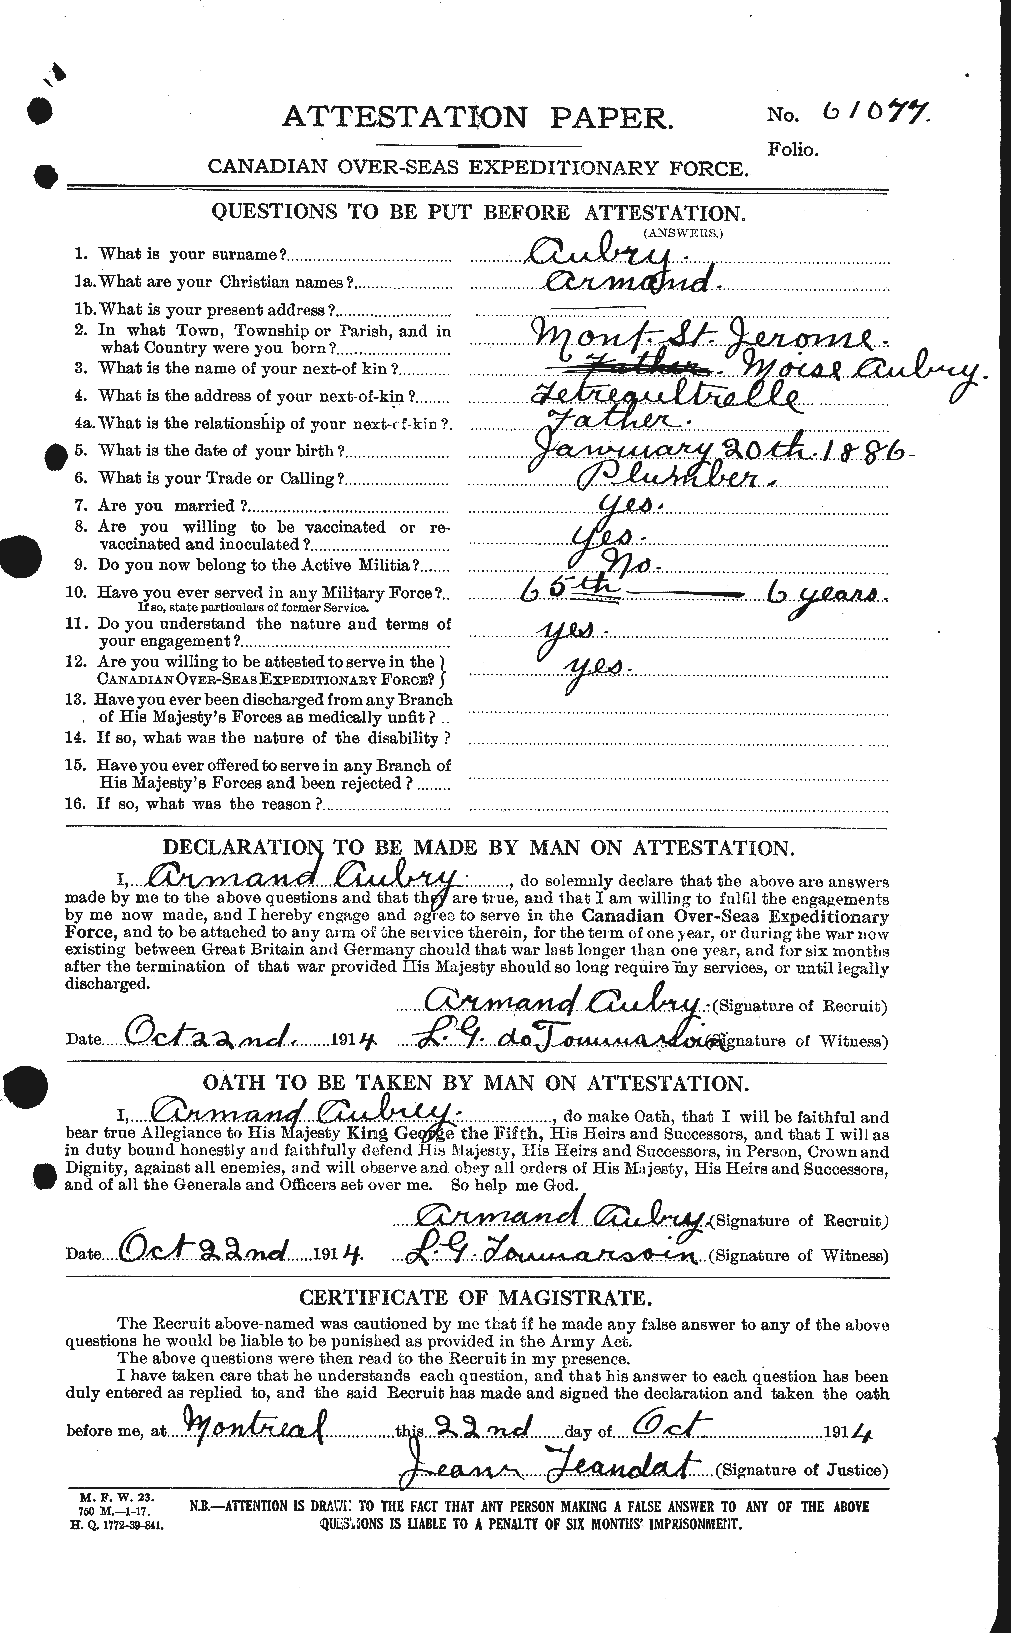 Personnel Records of the First World War - CEF 224657a